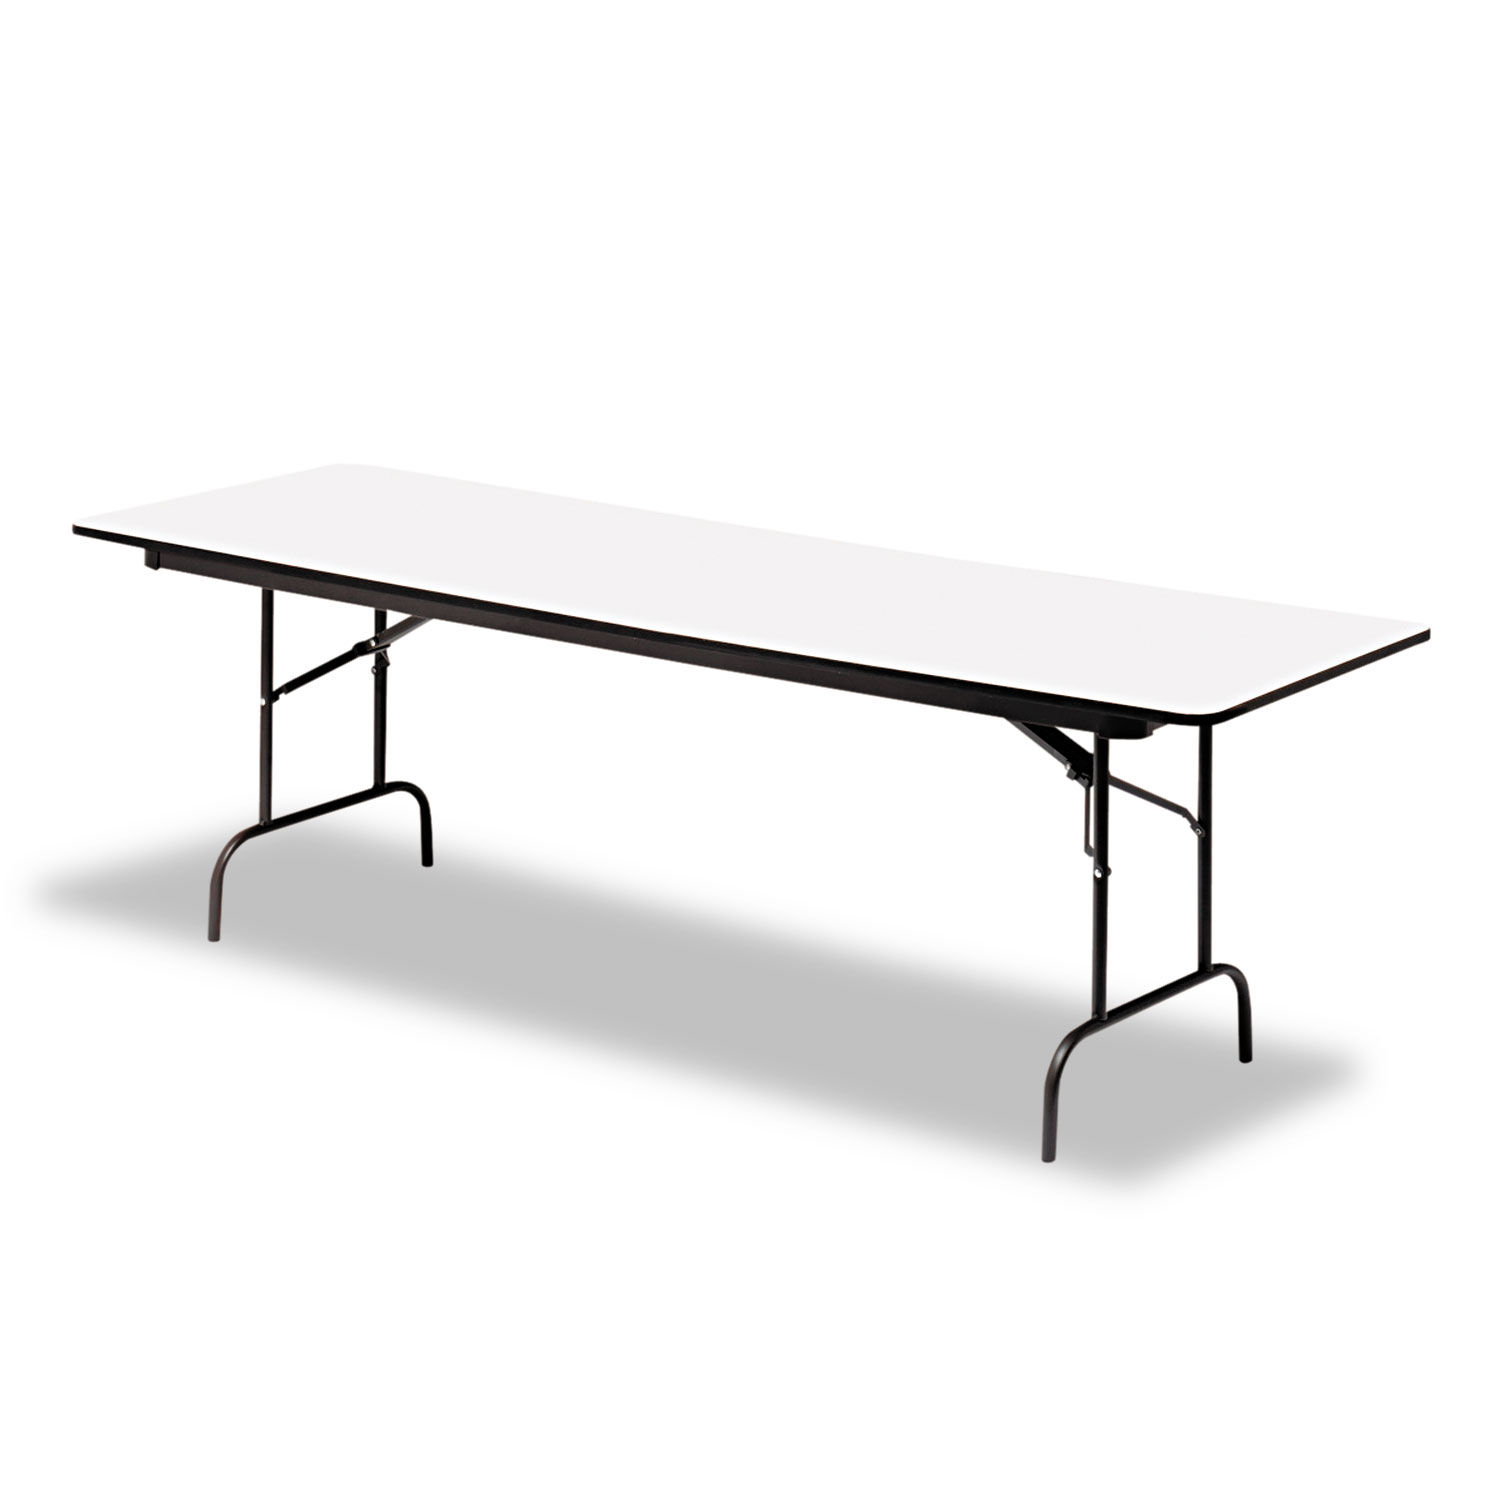 OfficeWorks Commercial Wood-Laminate Folding Table Rectangular Top, 72w x 30d x 29h, Gray/Charcoal